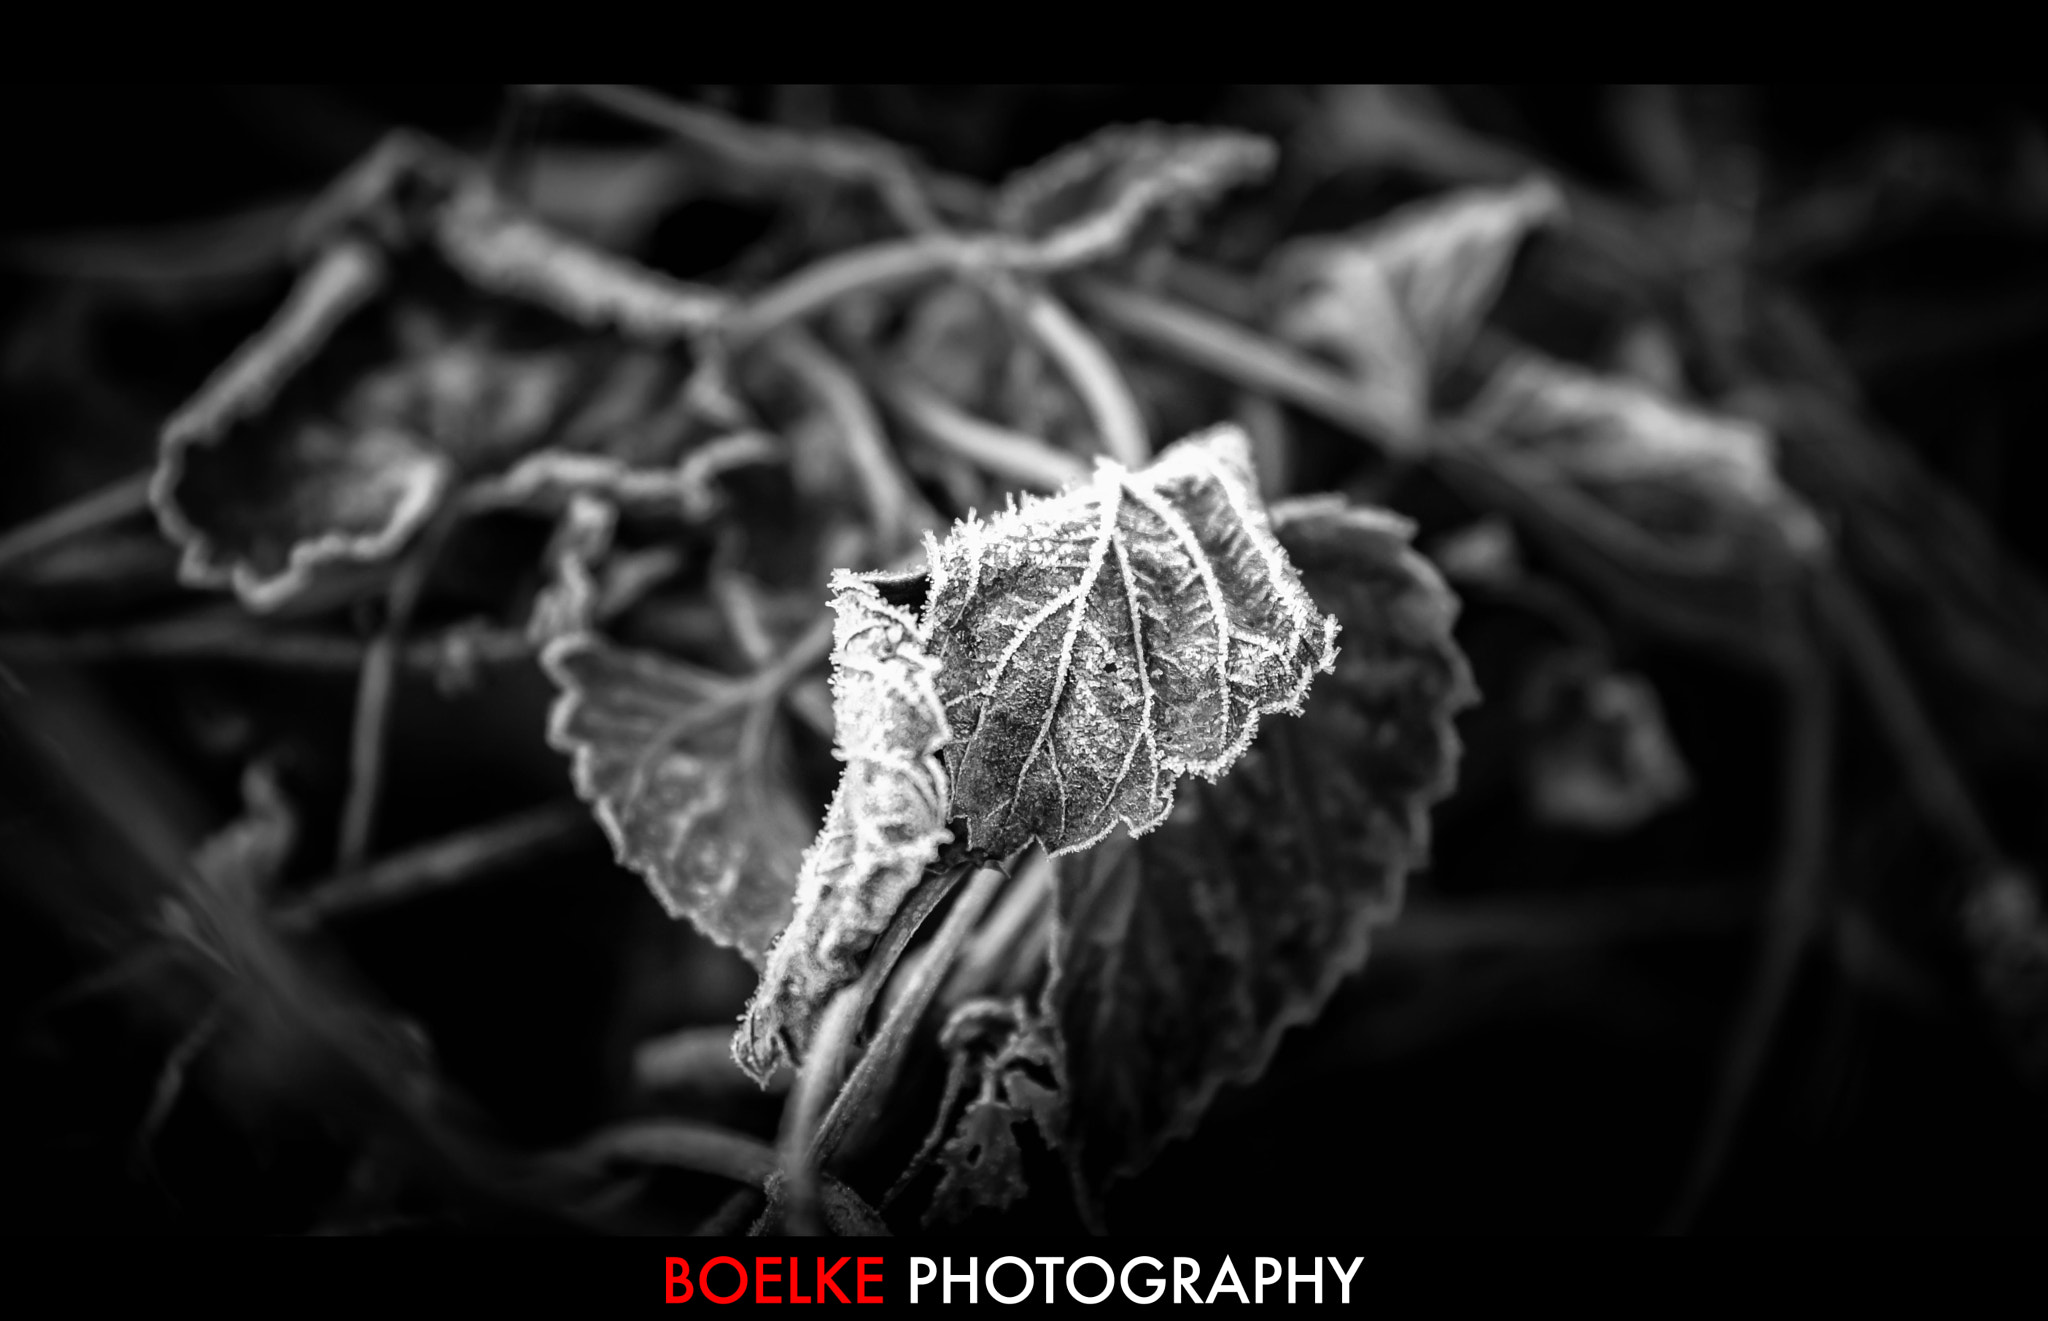 Canon EOS-1Ds Mark III + Sigma 24-105mm f/4 DG OS HSM | A sample photo. Frosty leaves photography